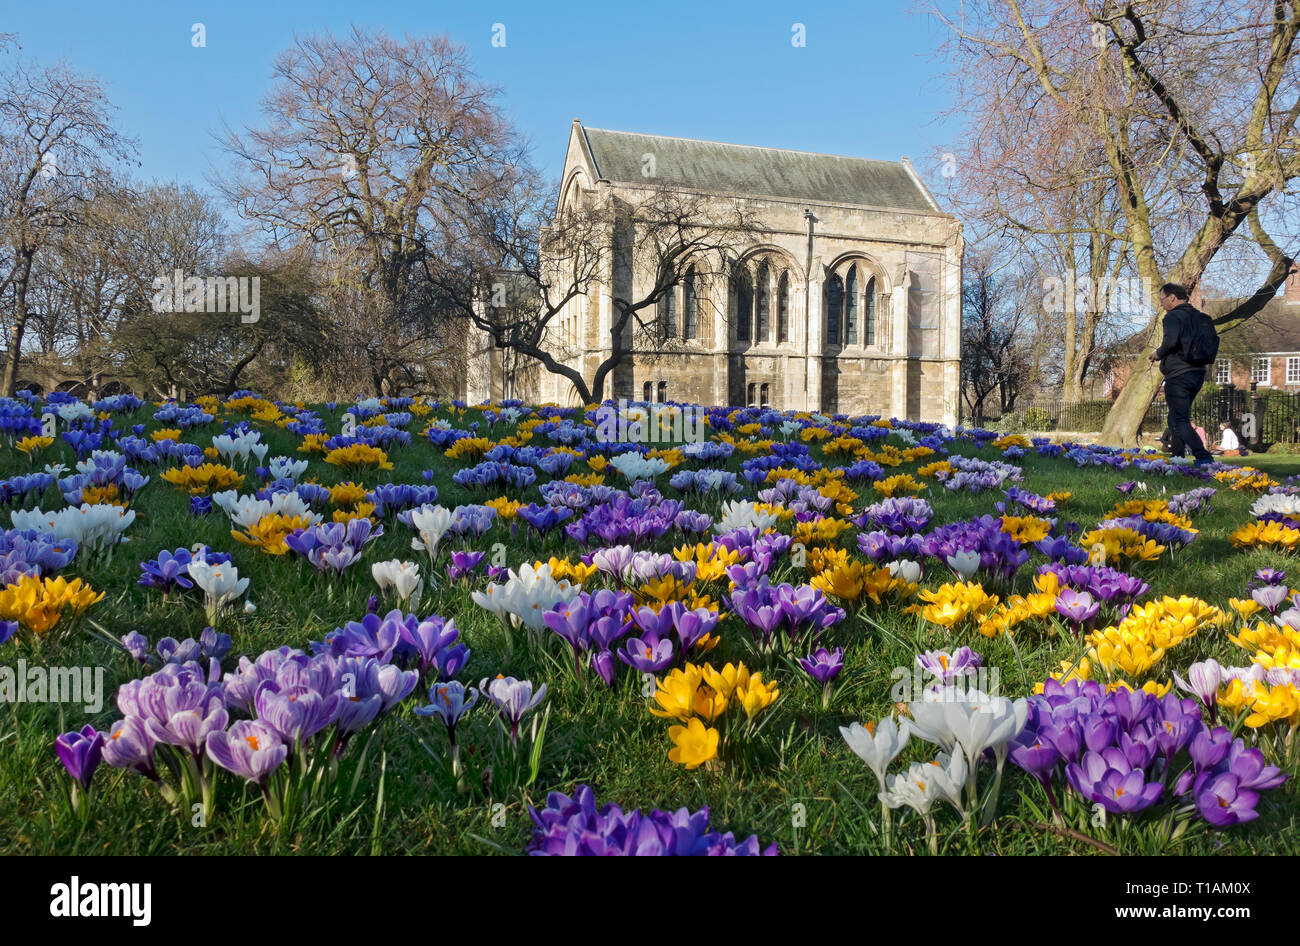 Minster Library and colourful crocus flowers crocuses in spring Dean's Park York North Yorkshire England UK United Kingdom GB Great Britain Stock Photo